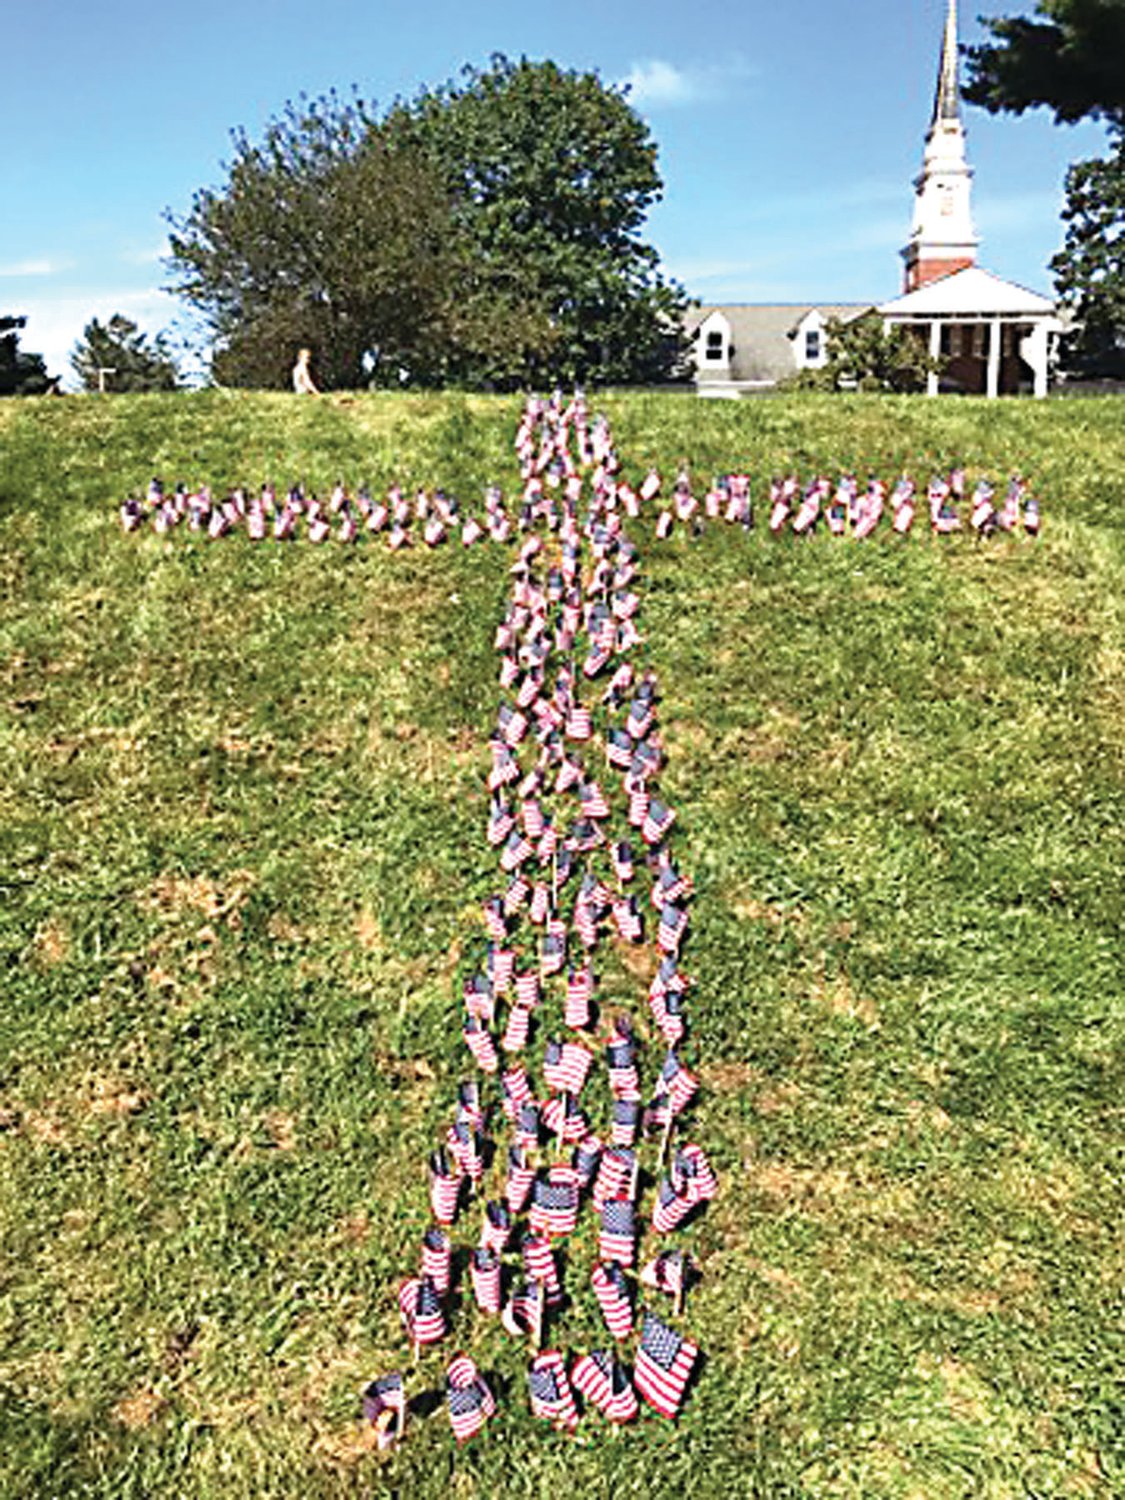 American flags planted in the shape of a cross at The Crossing.